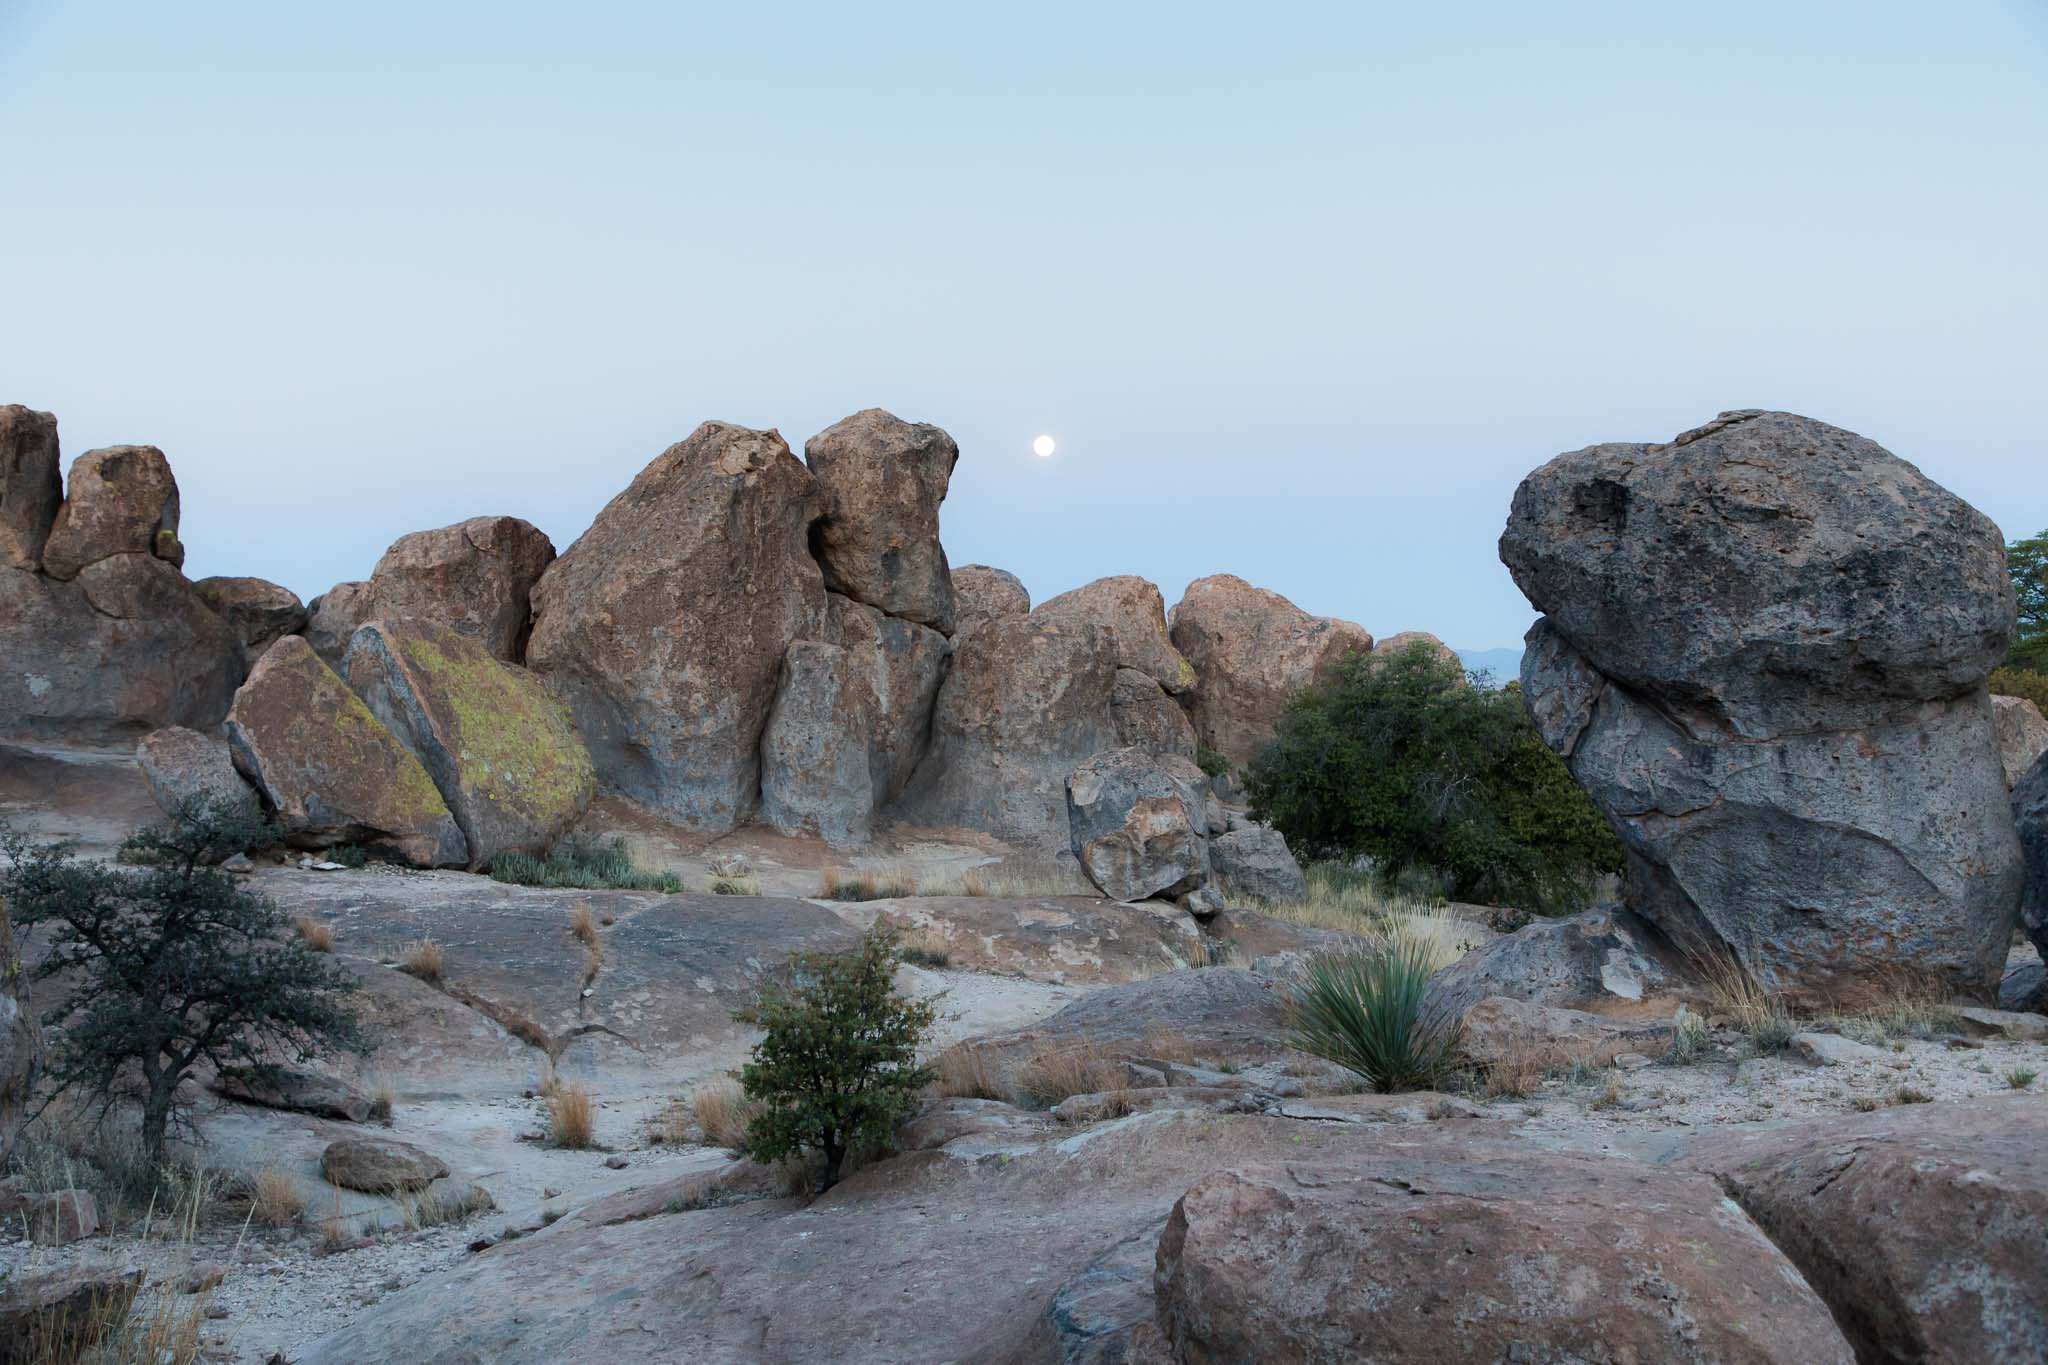 Moonset over rock formations, City of Rocks State Park, Faywood NM, April 11, 2017